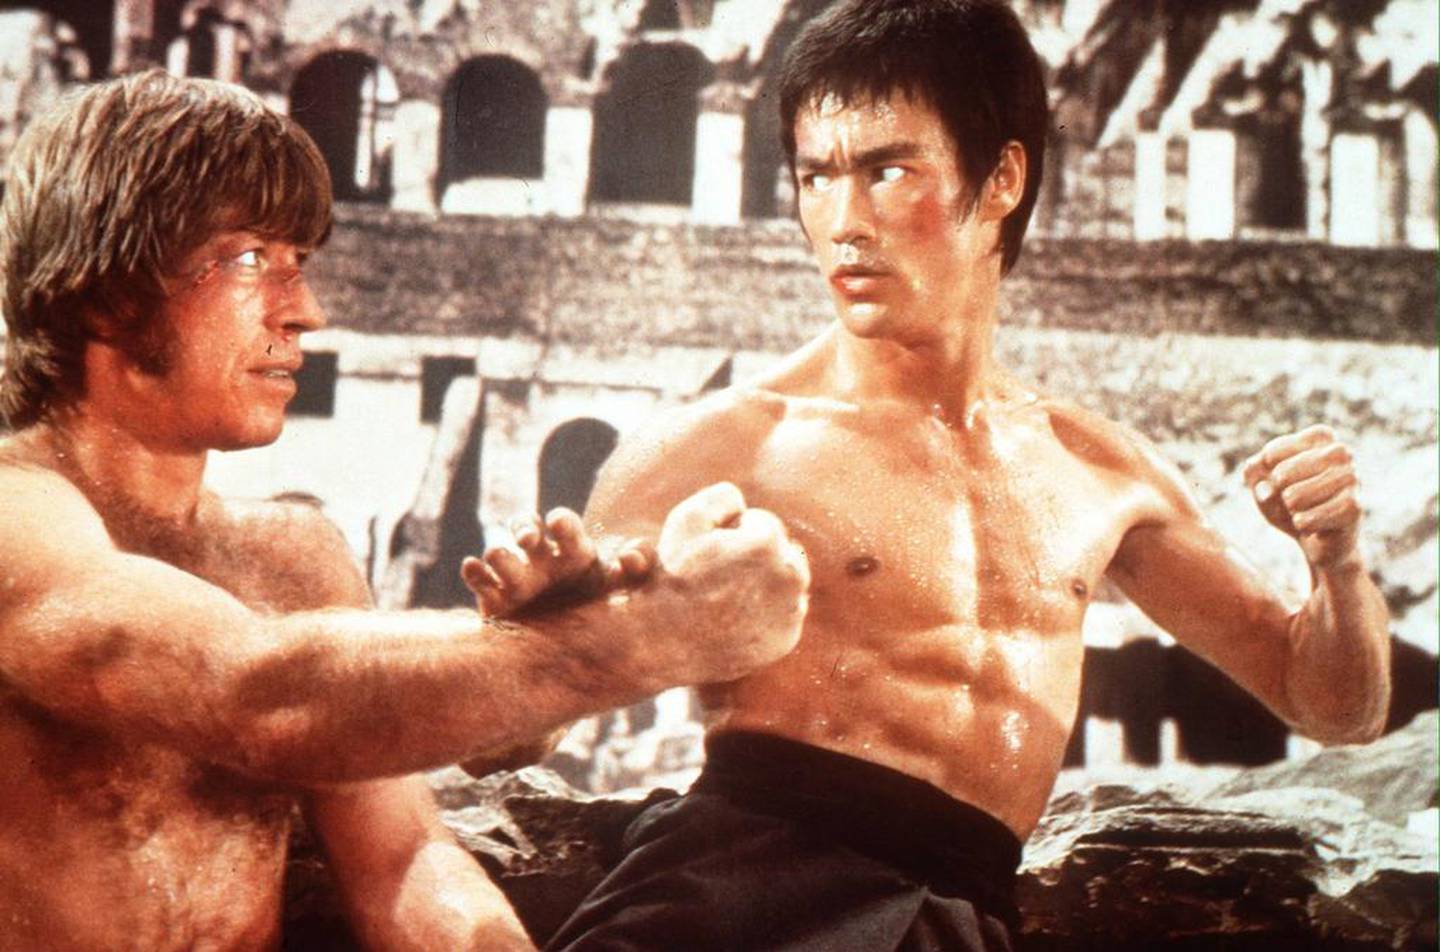 Bruce Lee, right, and Chuck Norris, during the filming of 'The Way of the Dragon'.